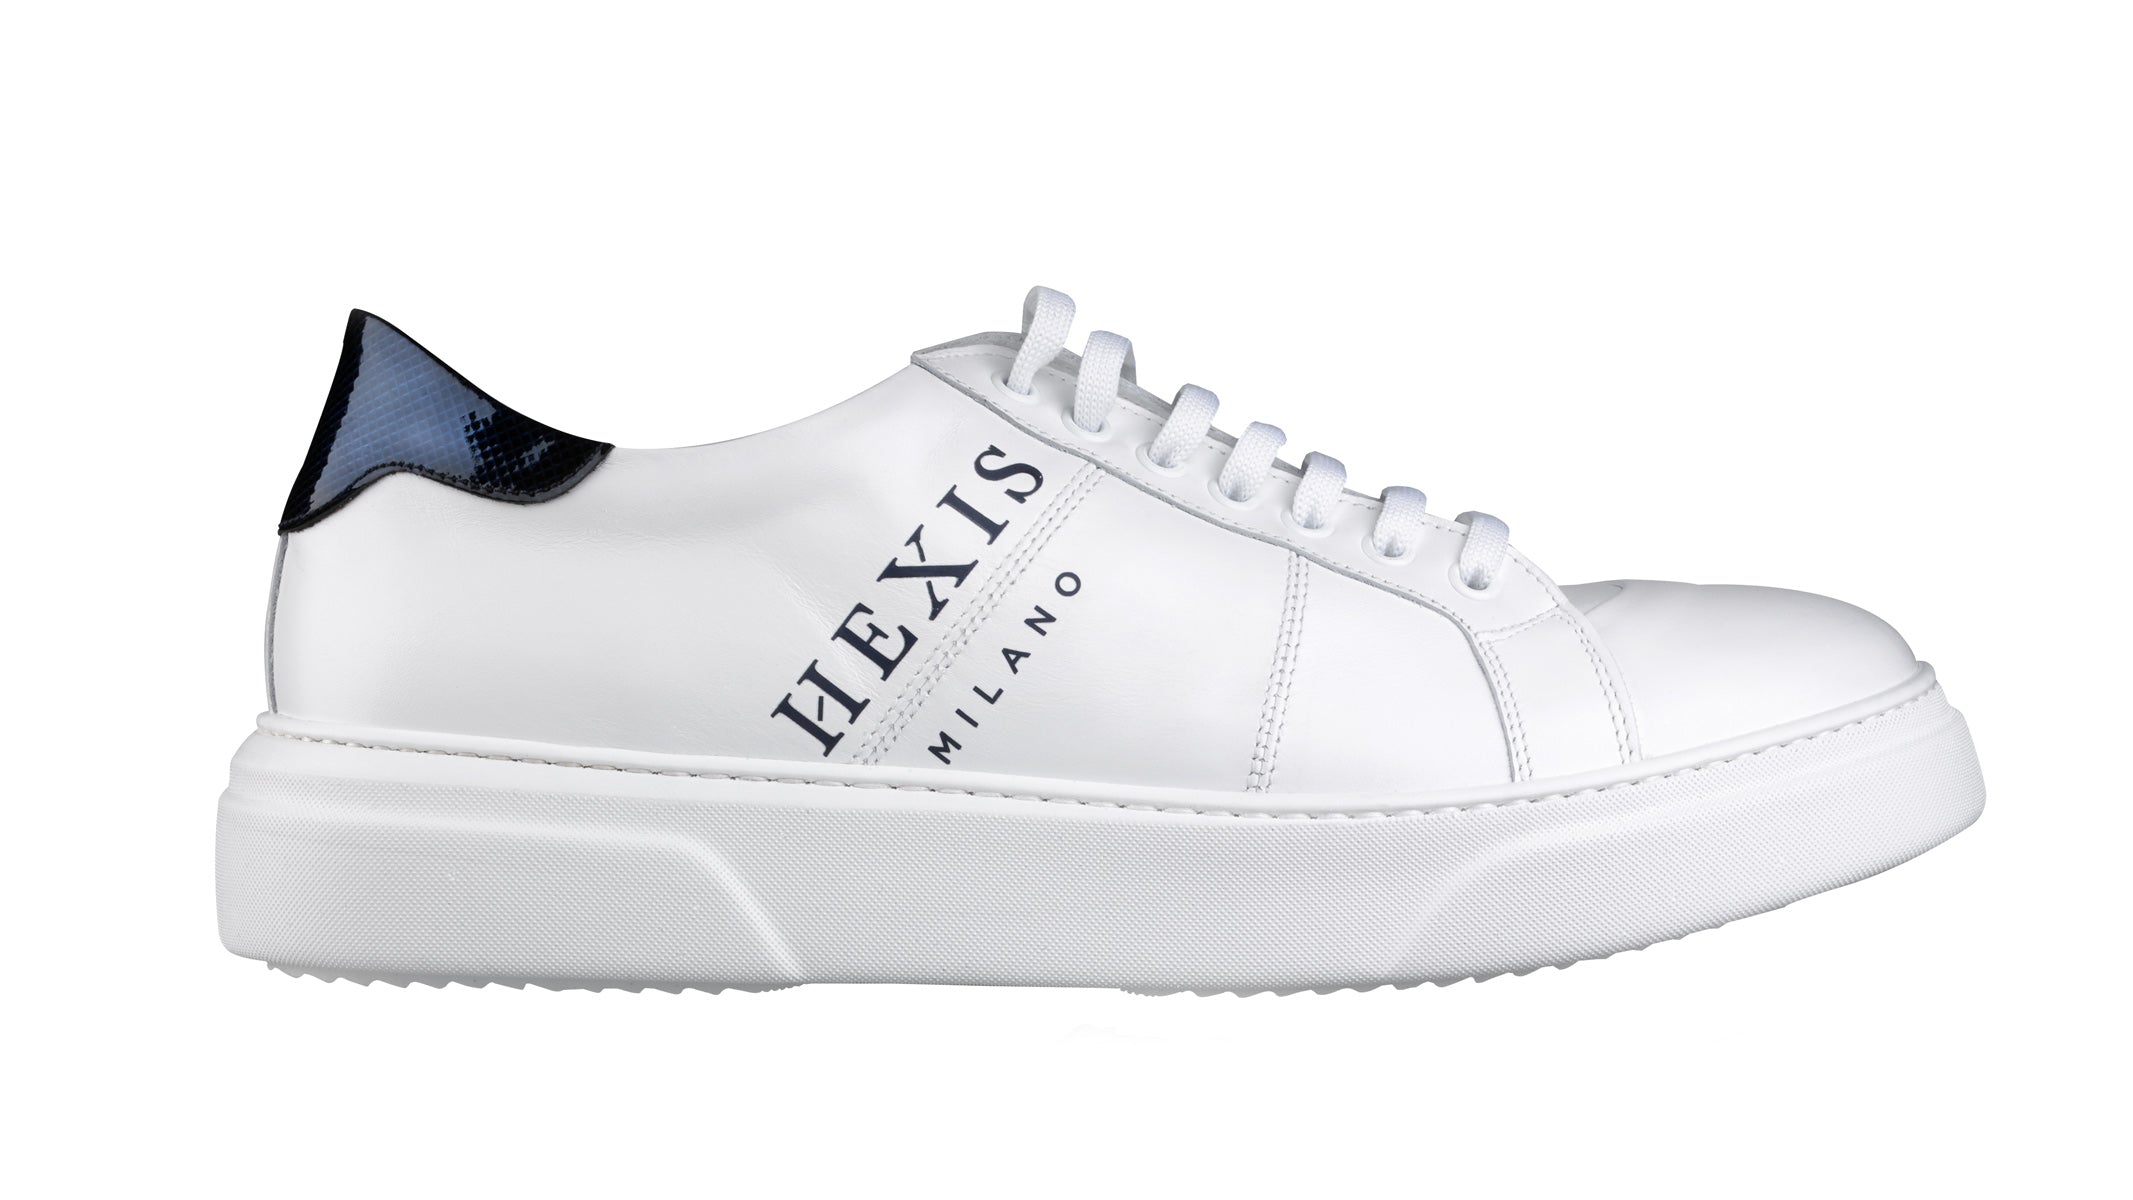 Hexis sneakers in white leather